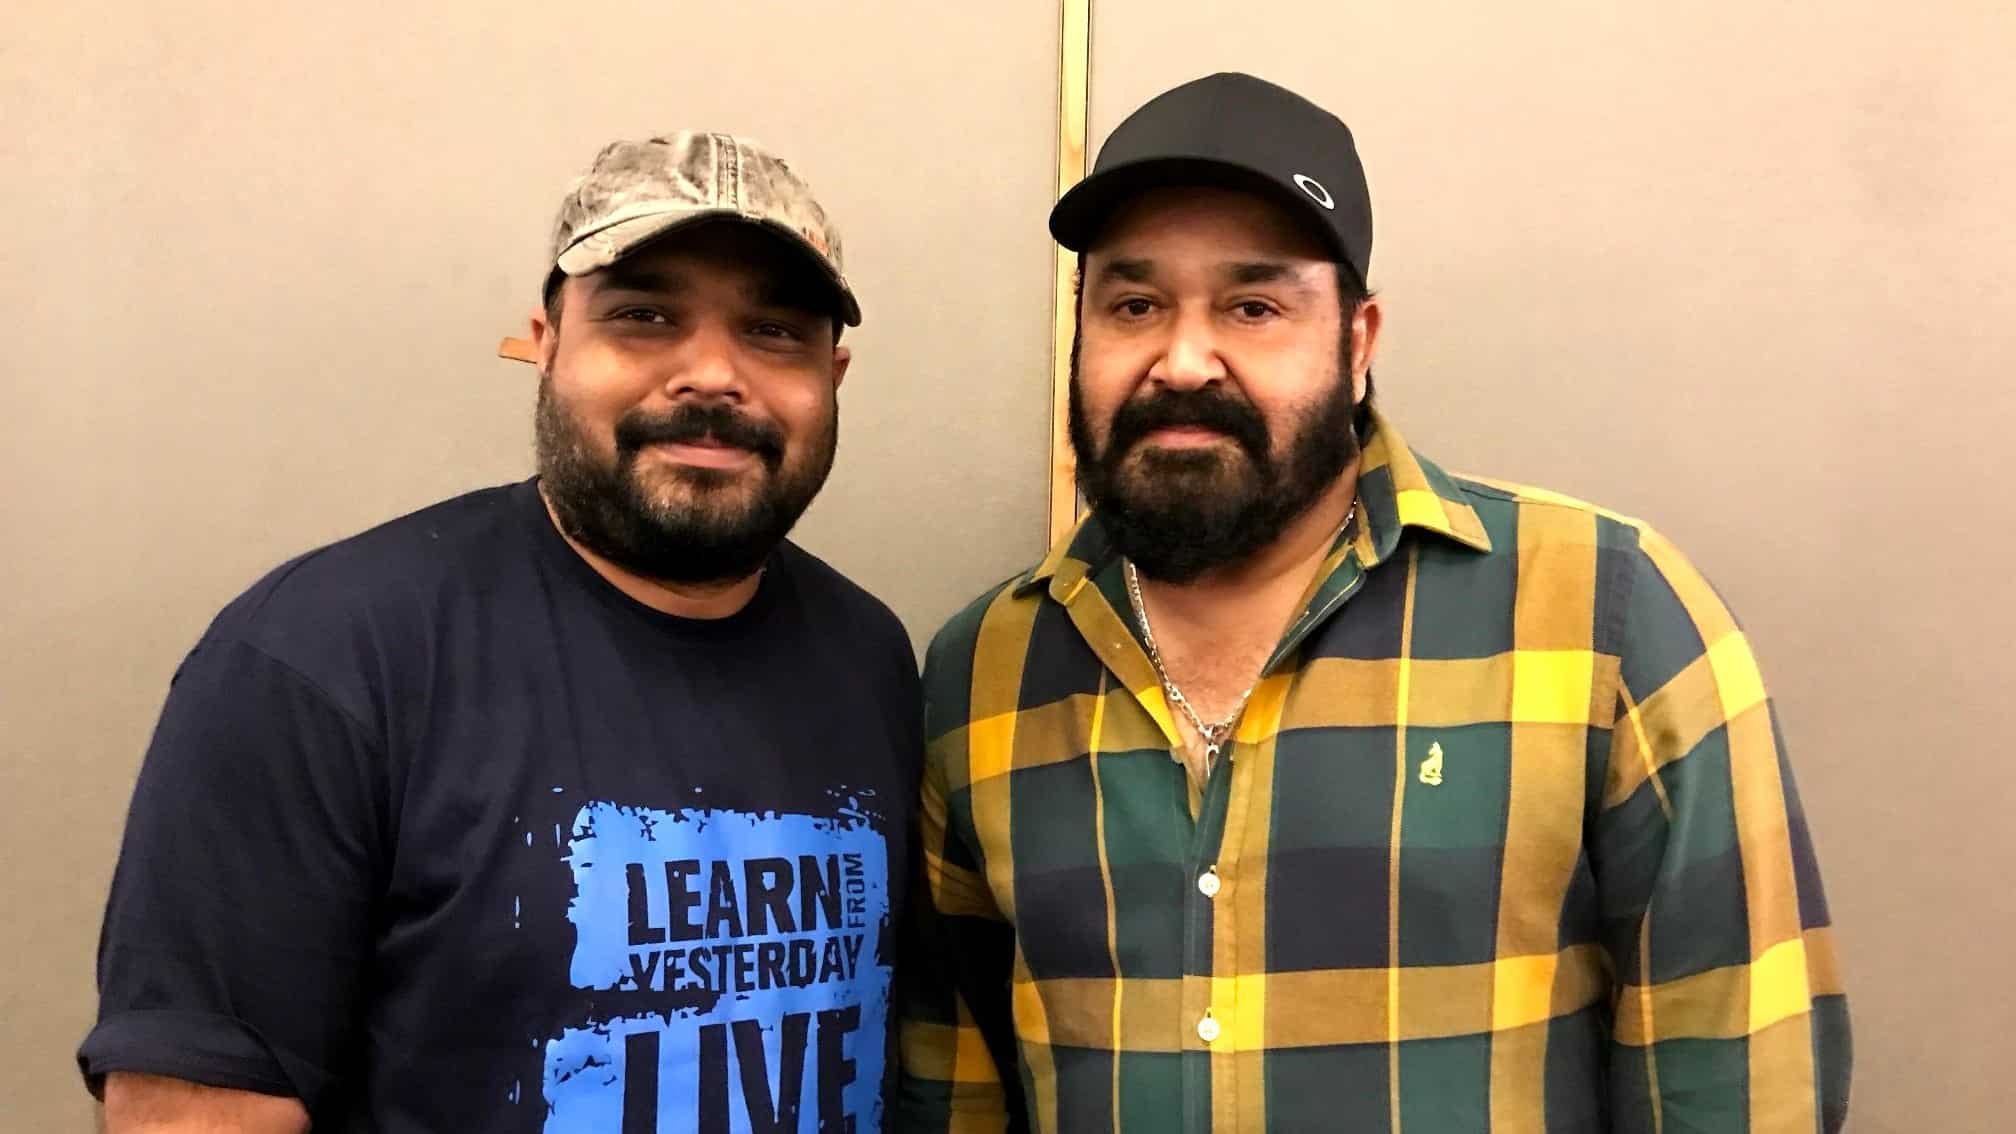 https://www.mobilemasala.com/movies/Mohanlal-and-Vysakh-to-team-up-soon-Turbo-director-drops-major-update-i268937